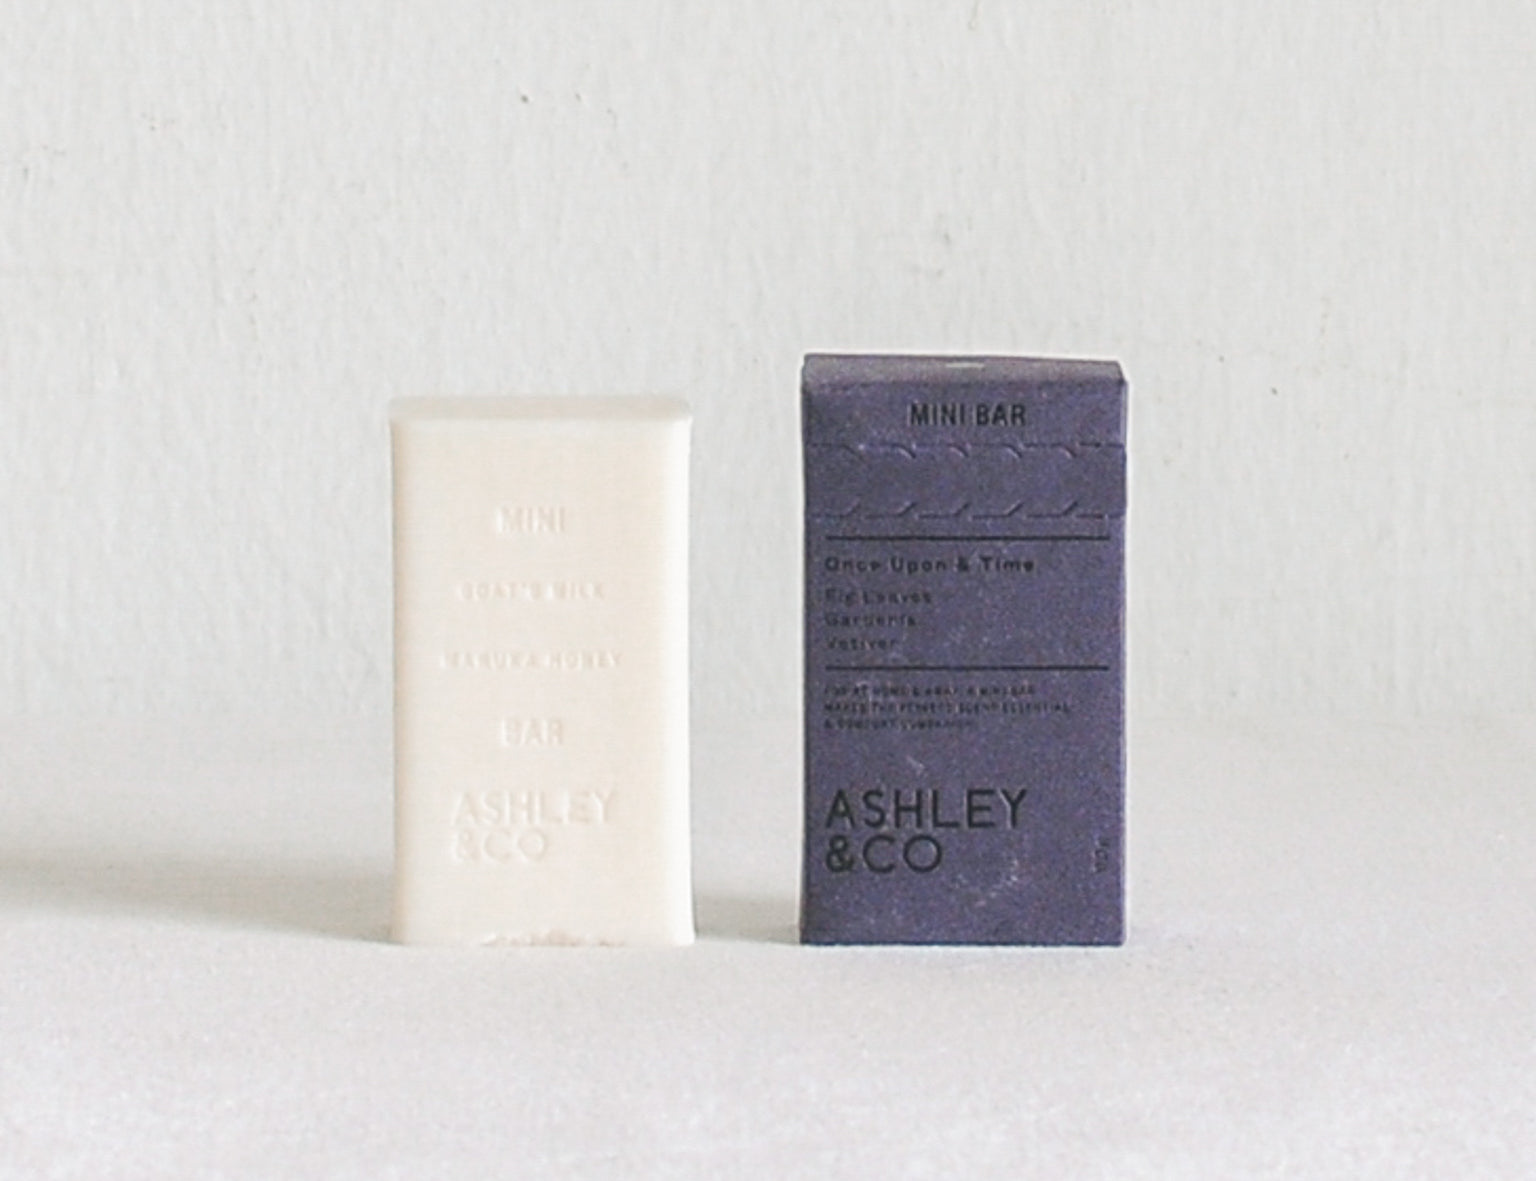 Ashley & Co Mini Soap Bar - Once Upon & Time